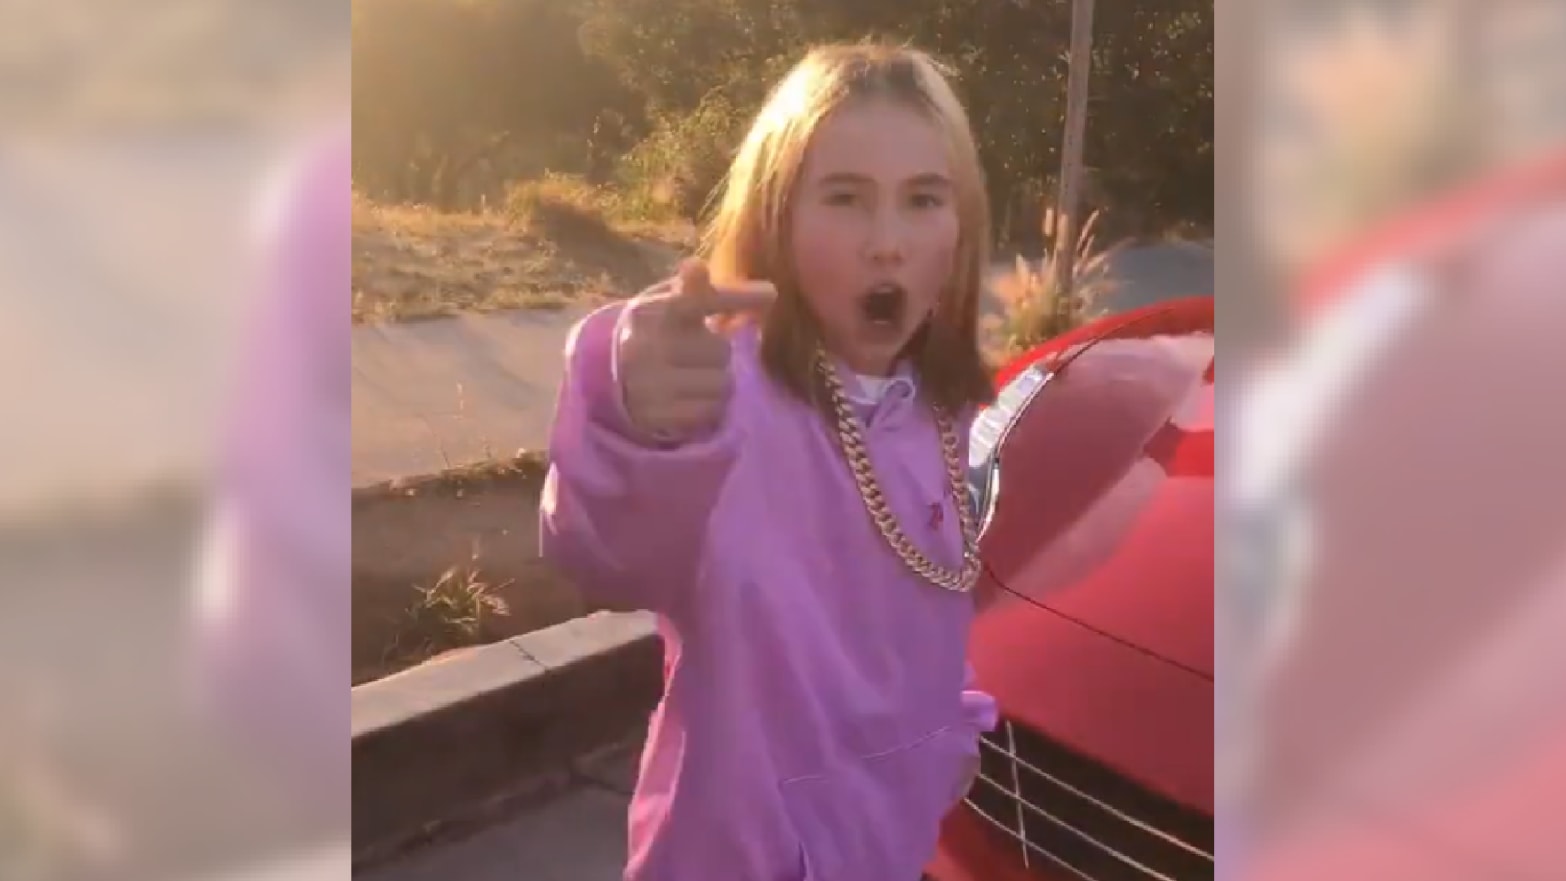 Lil Tay, who was announced dead by her family on Wednesday at the age of 14.